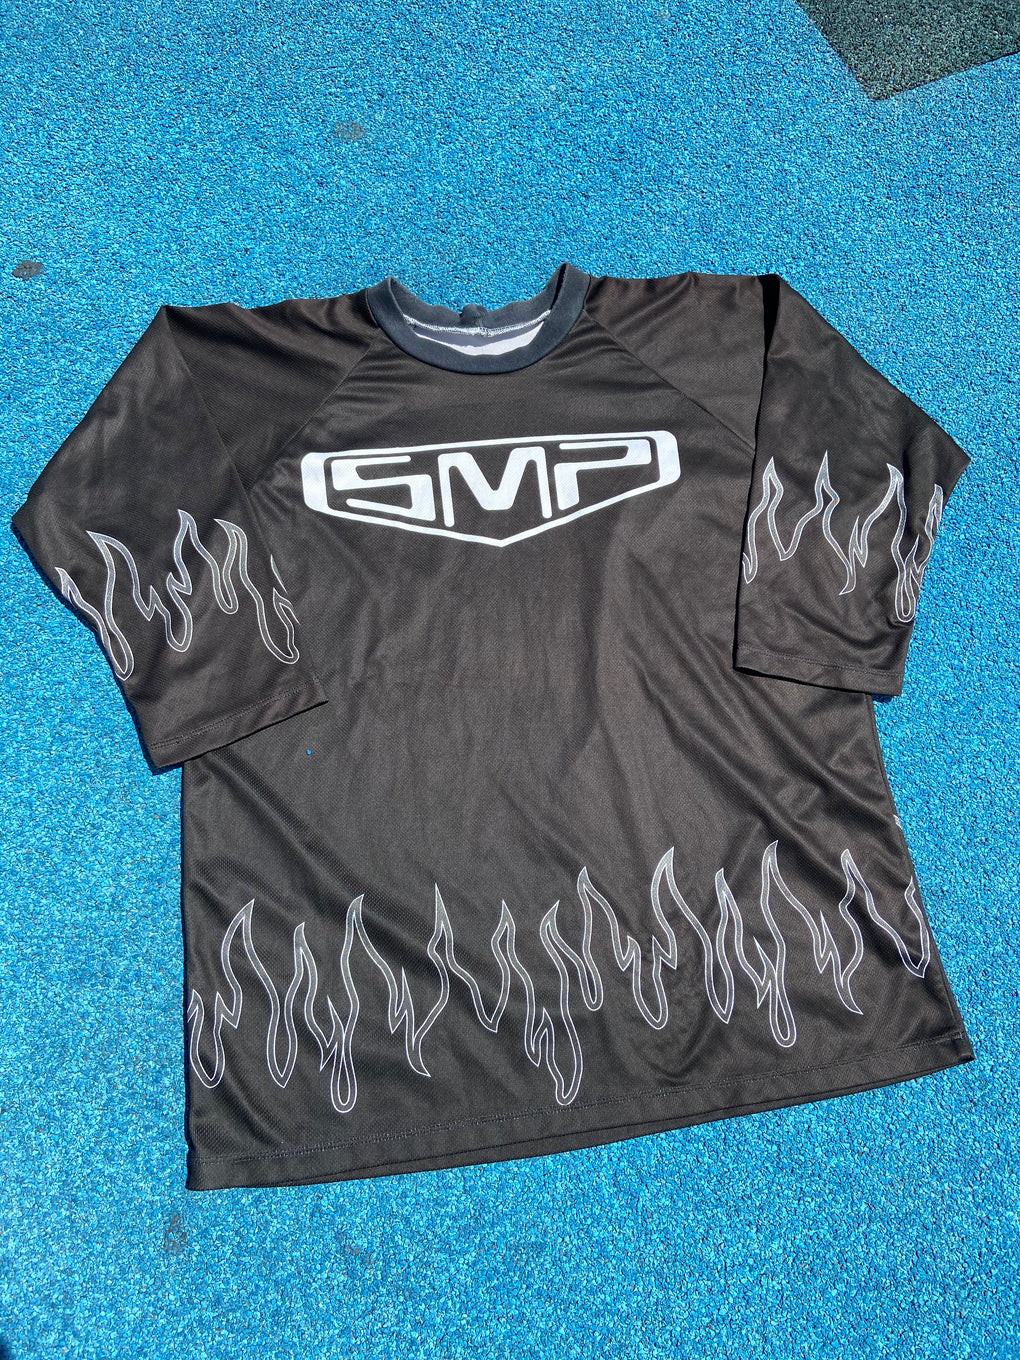 SMP FLAME JERSEY (XS)